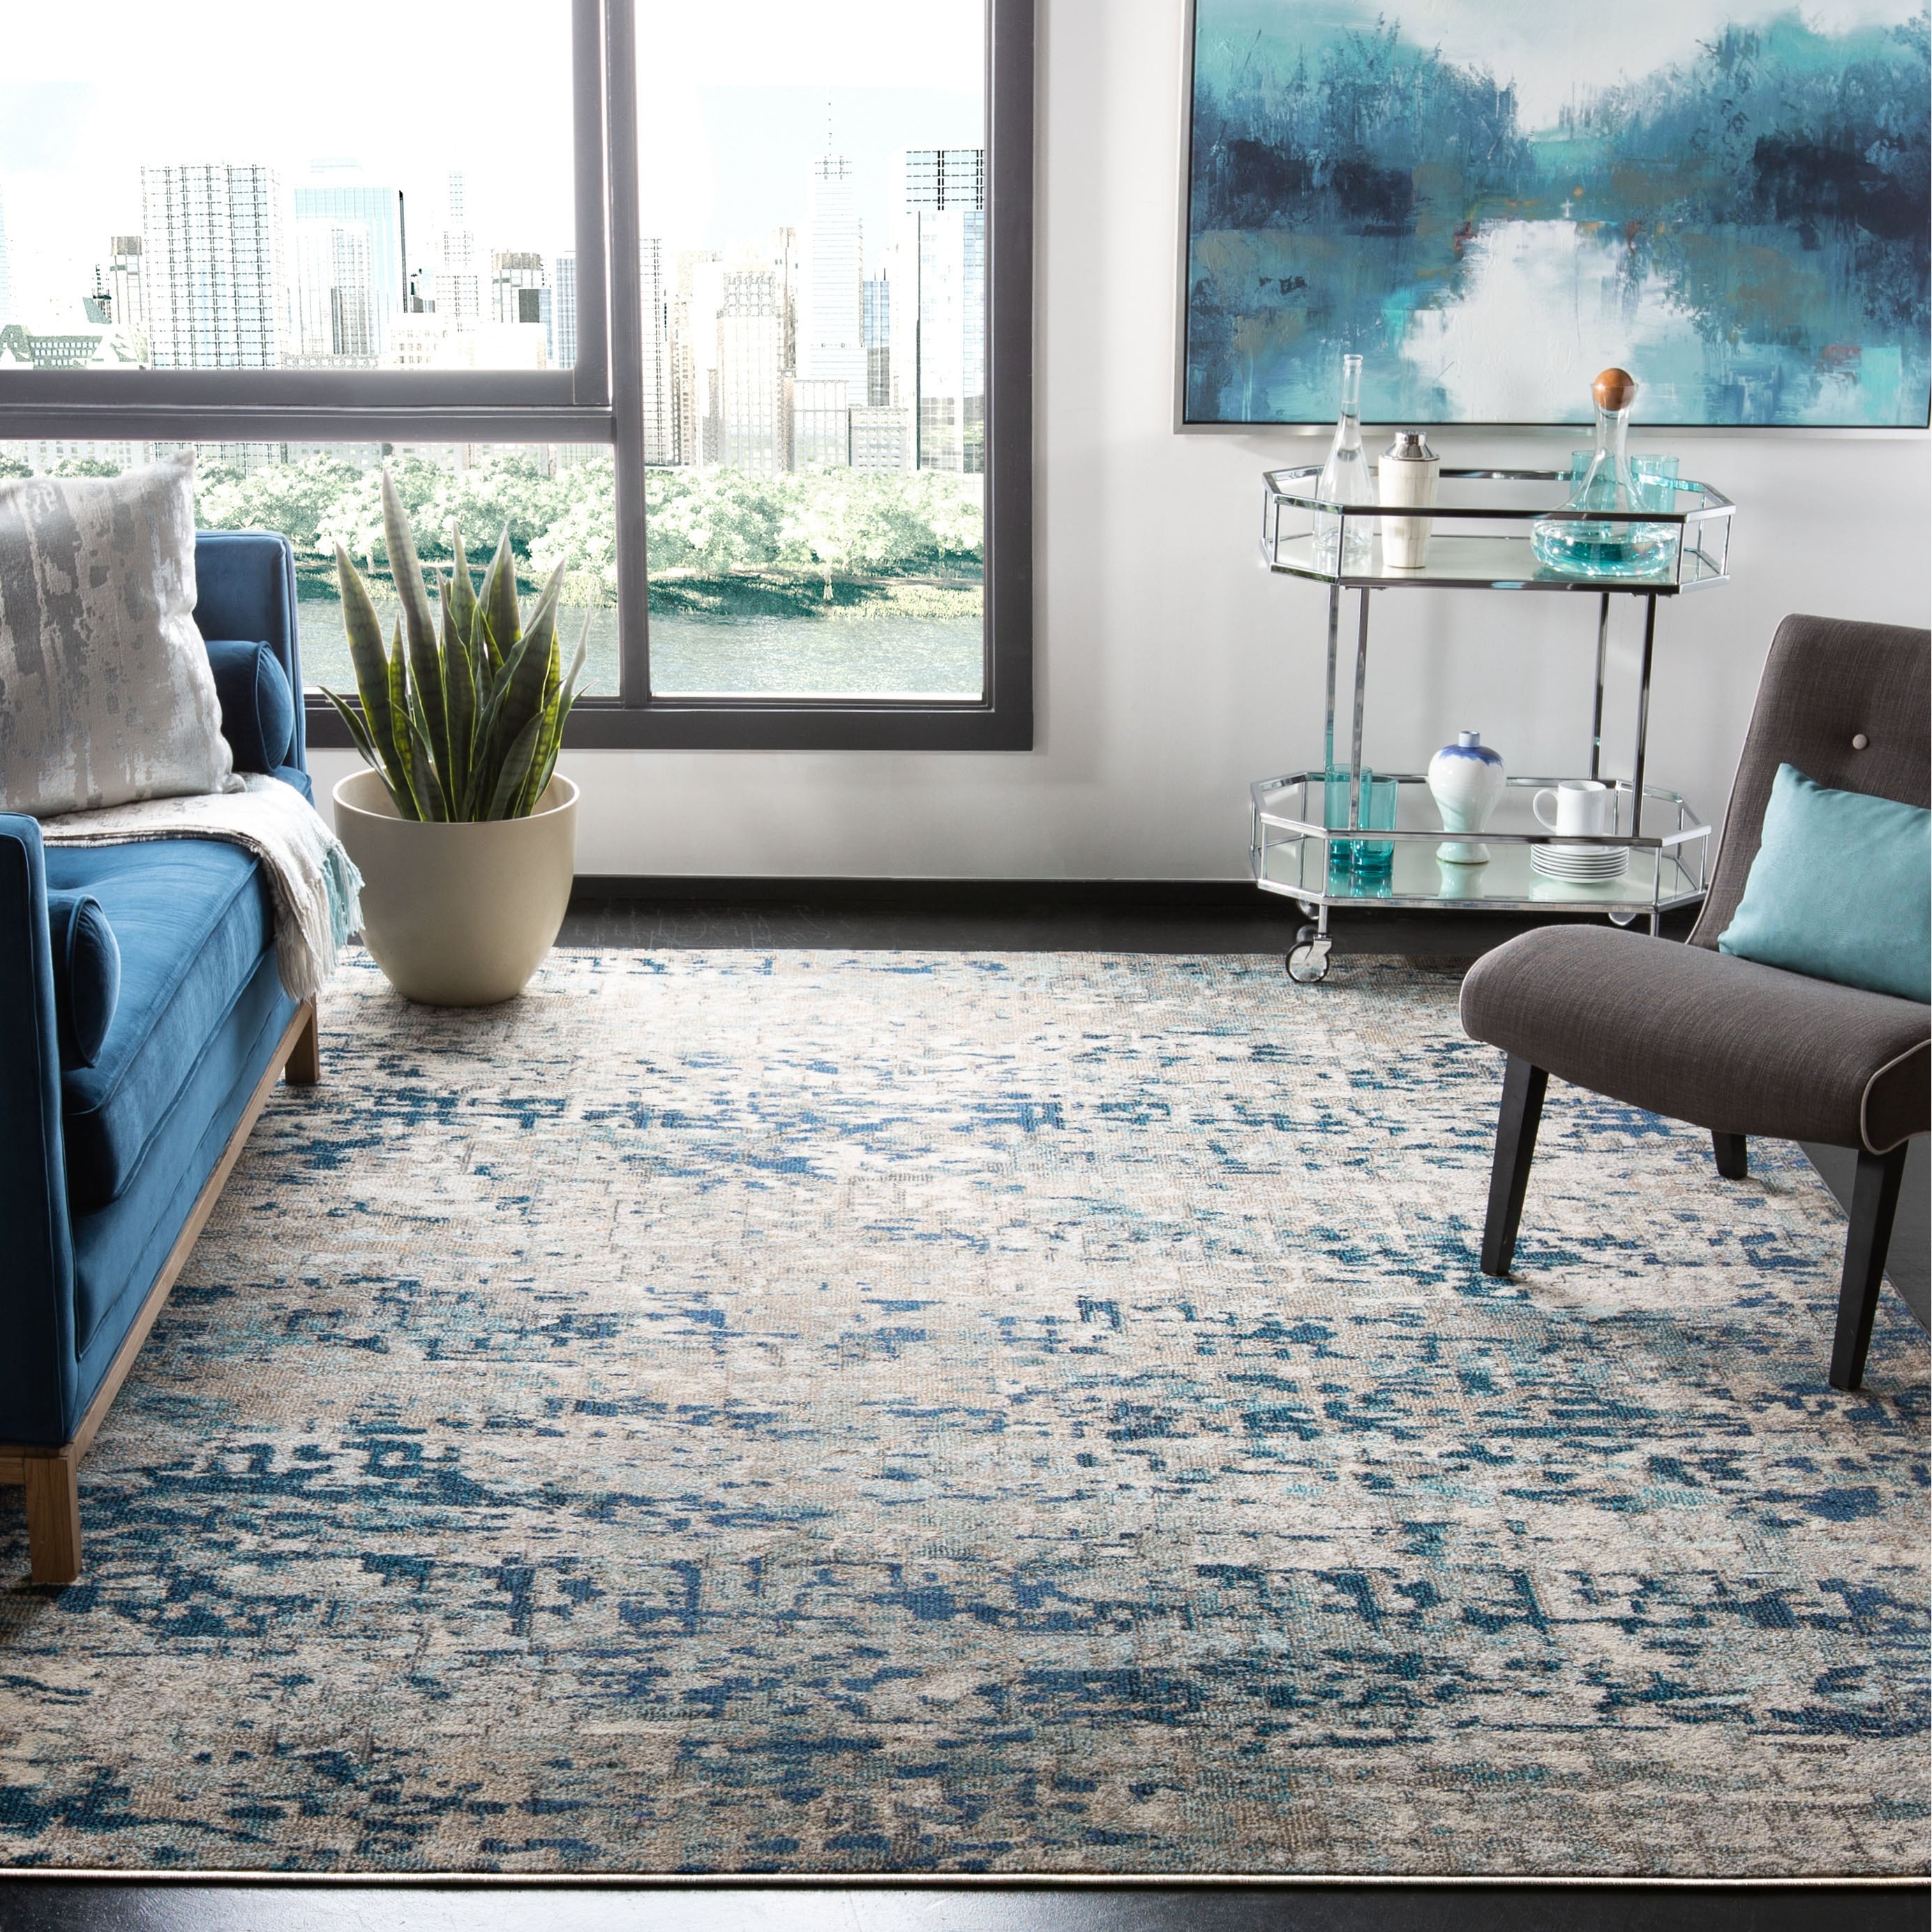 https://ak1.ostkcdn.com/images/products/is/images/direct/5d4fee81519c06f50835b480b8c834a84547f7ba/SAFAVIEH-Madison-Loane-Modern-Abstract-Rug.jpg